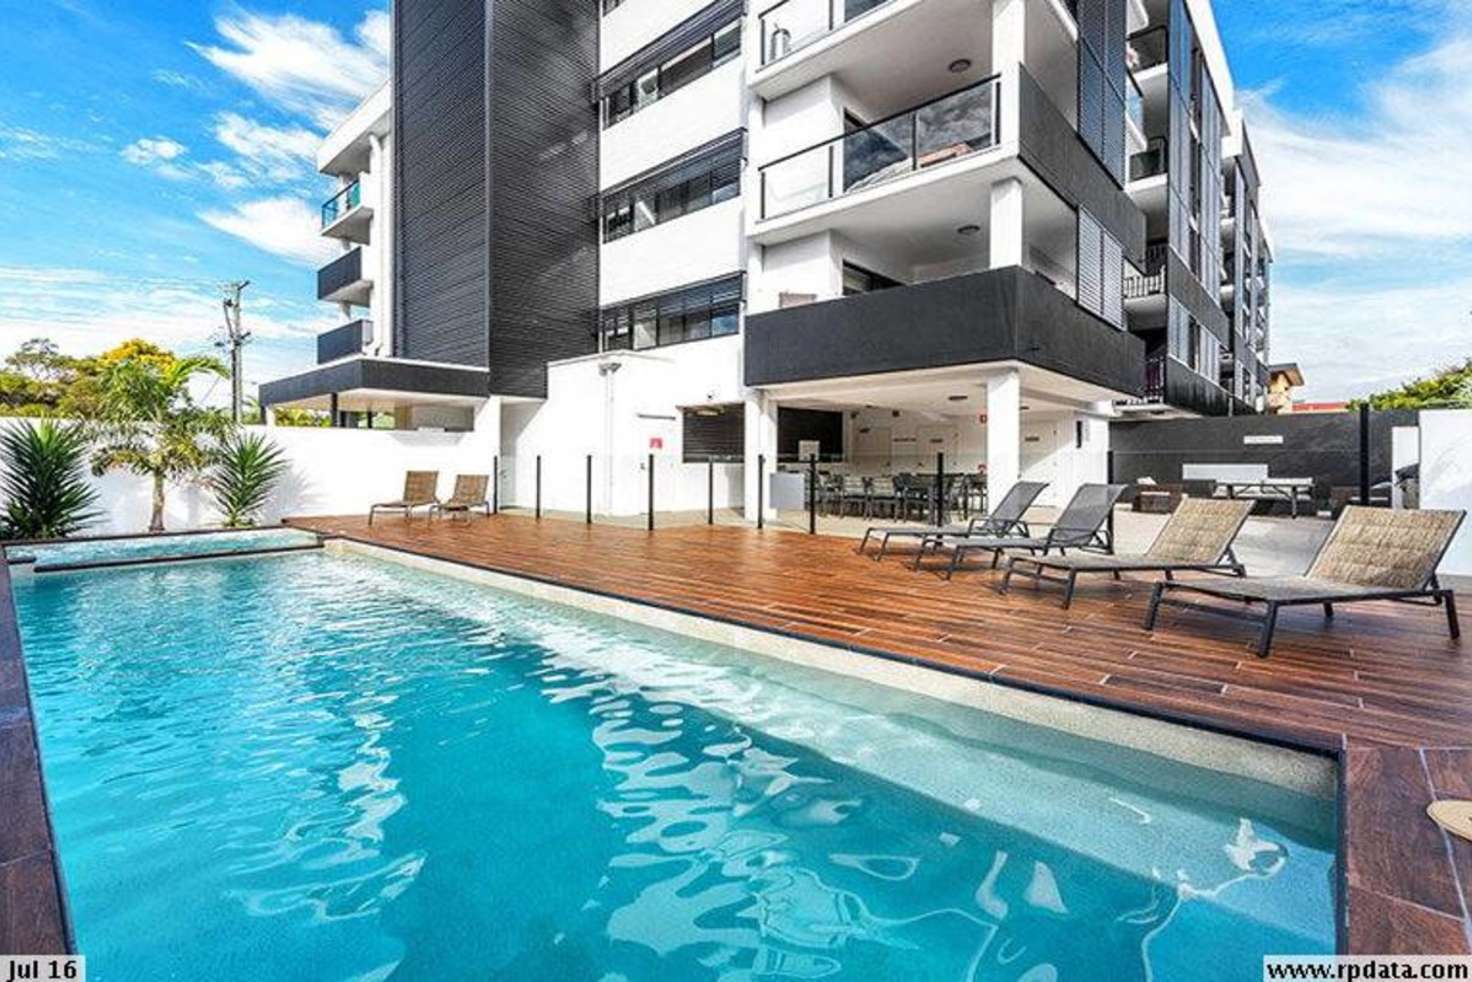 Main view of Homely apartment listing, 120-124 Melton Road, Nundah QLD 4012